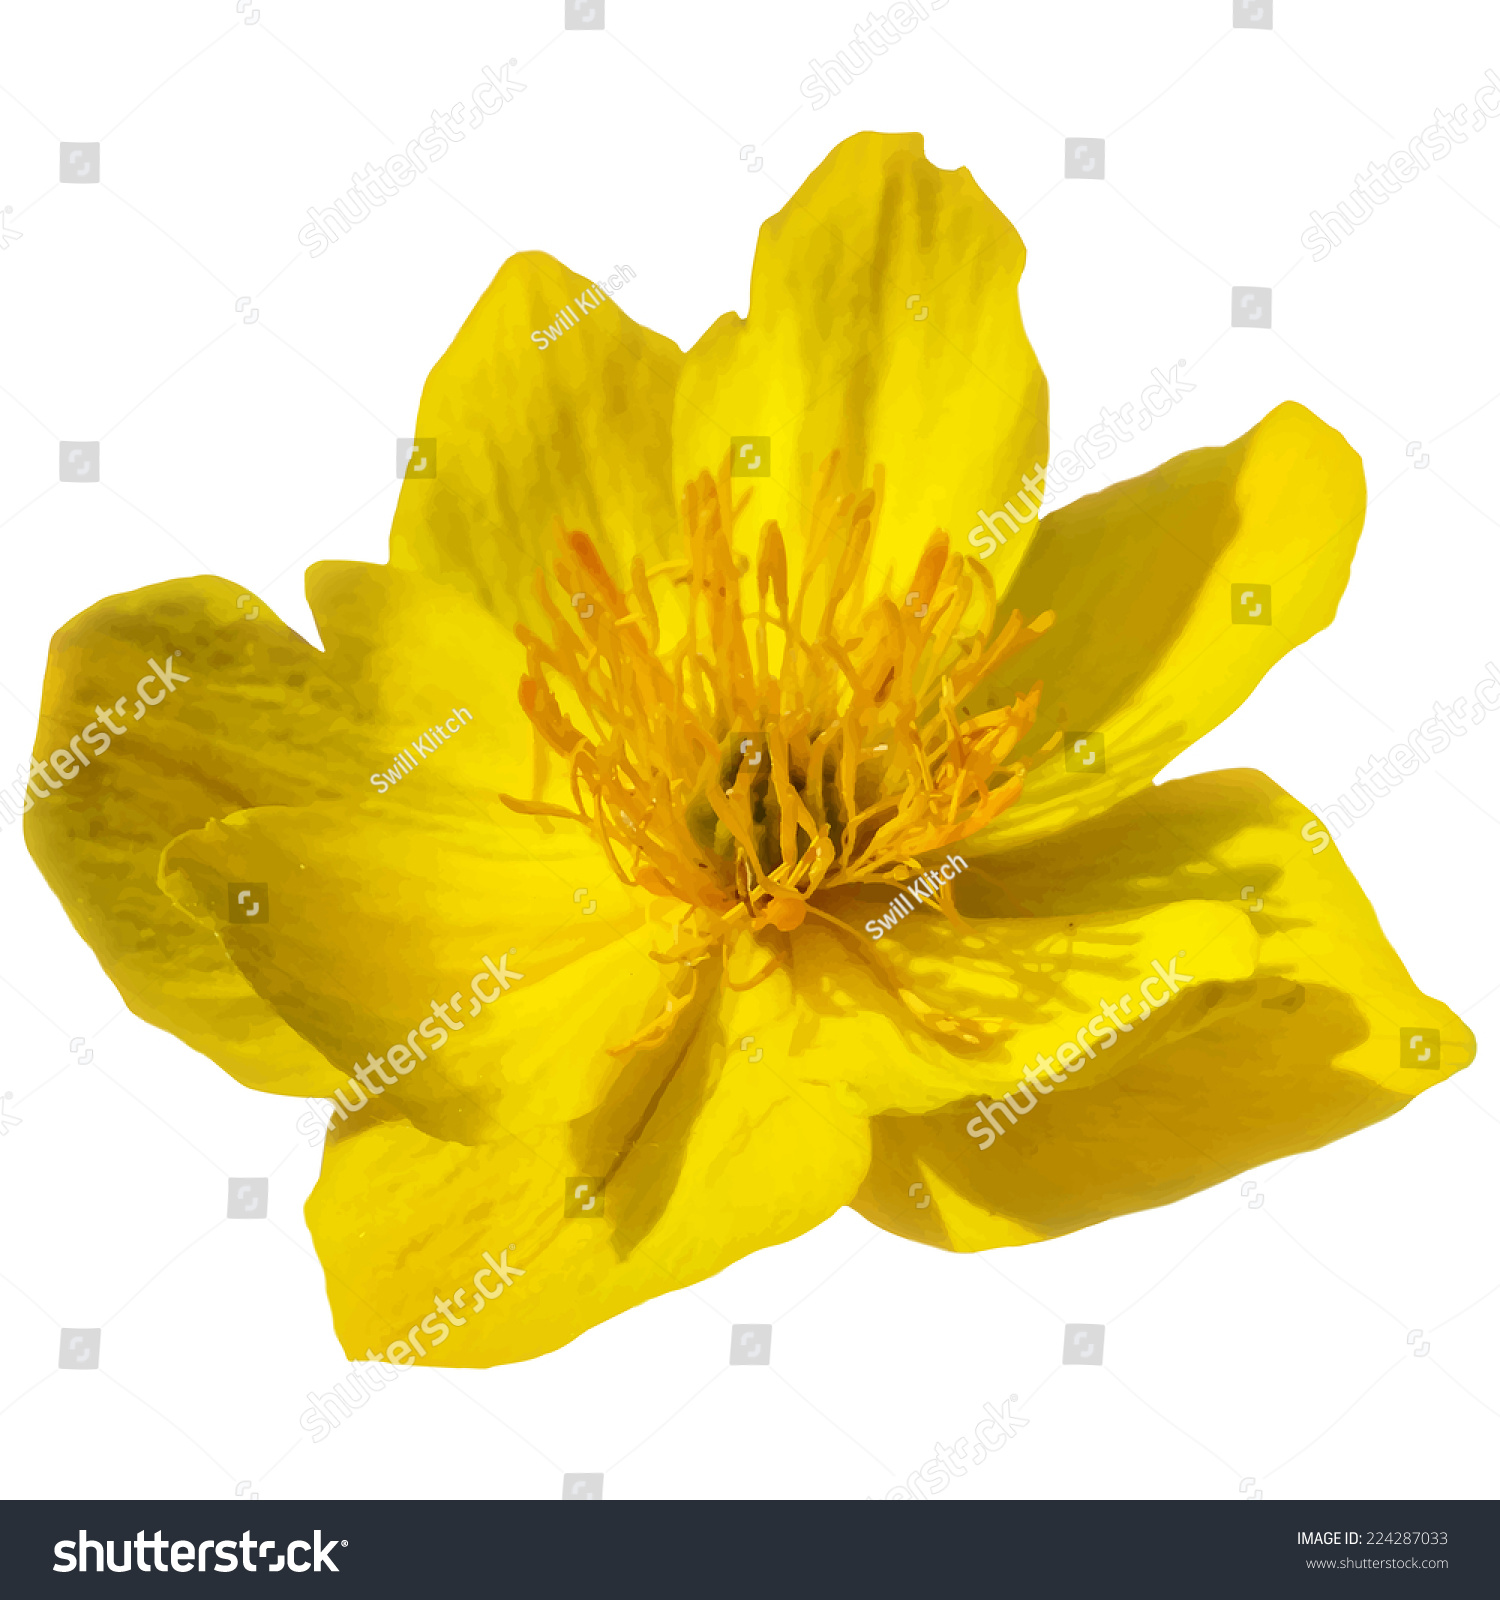 Yellow Vector Flower Isolated On White Background - 224287033